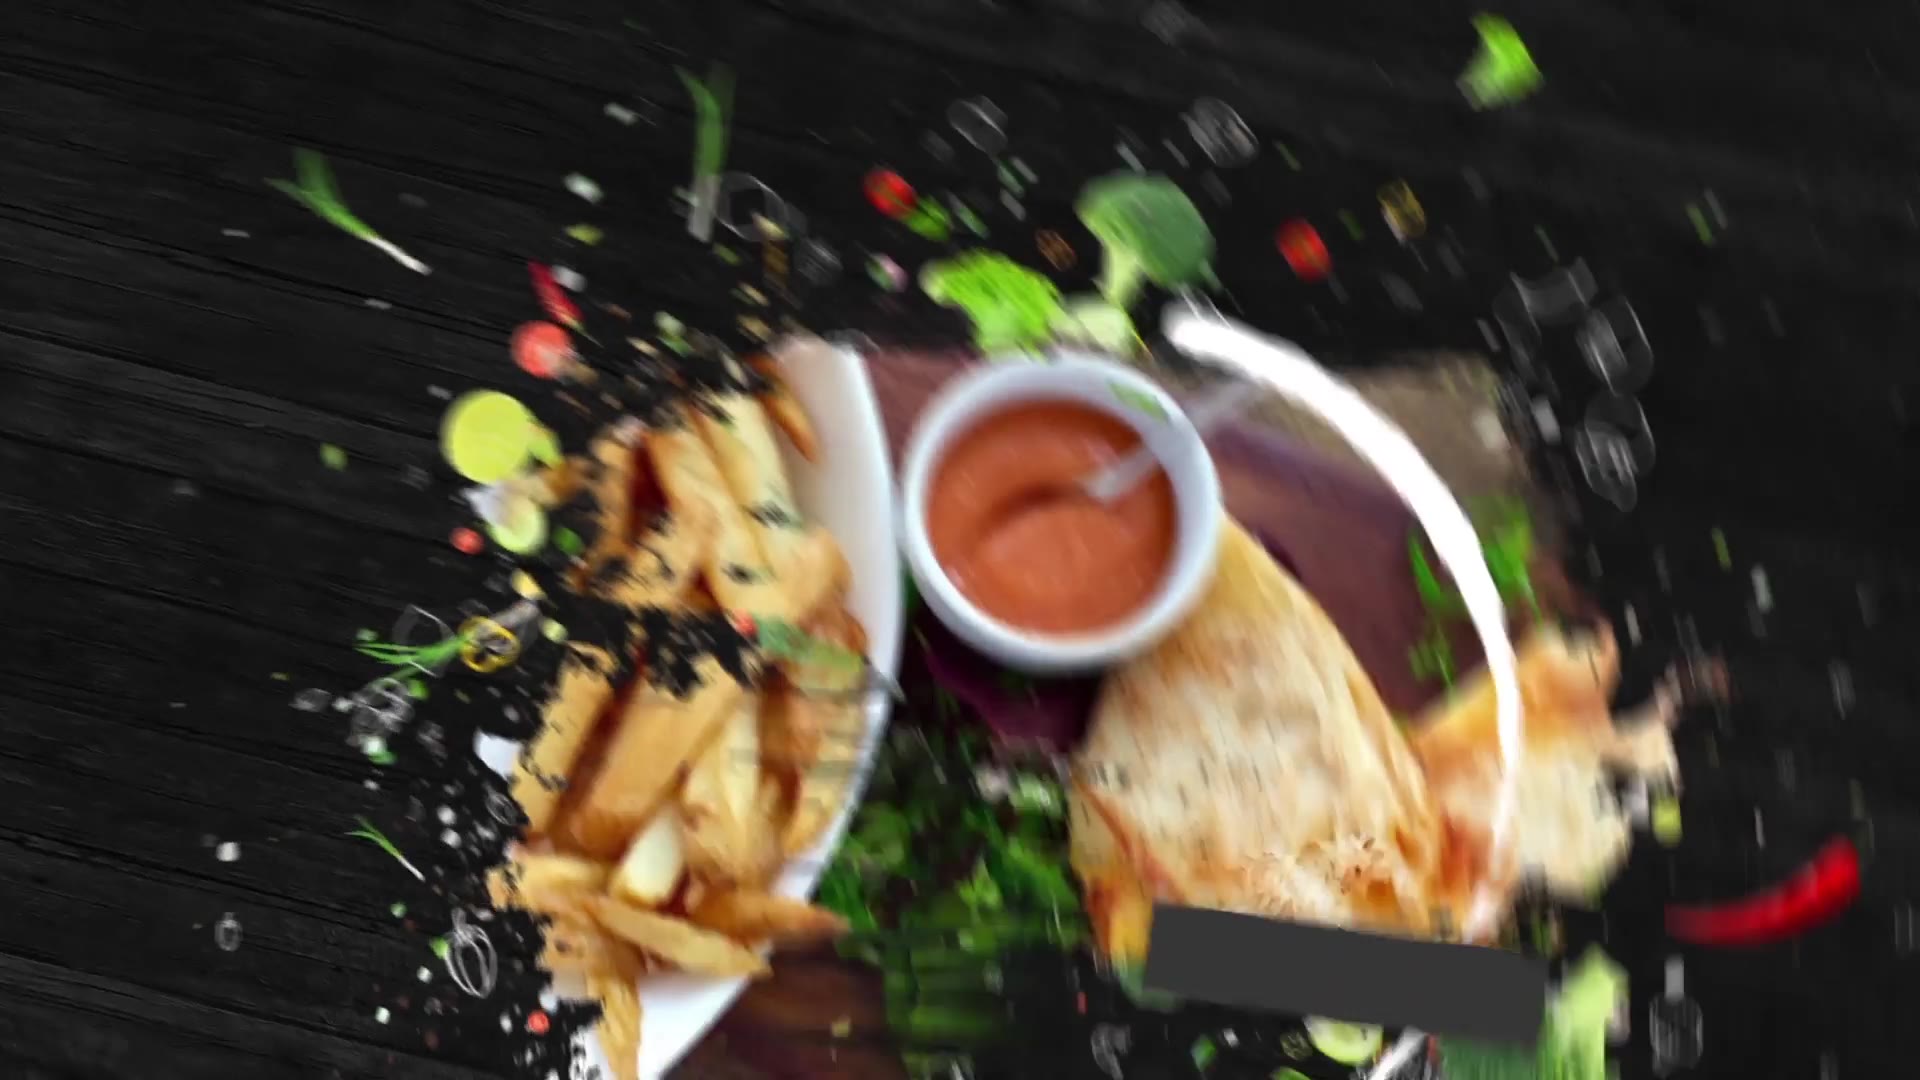 Food Time - Download Videohive 20872431